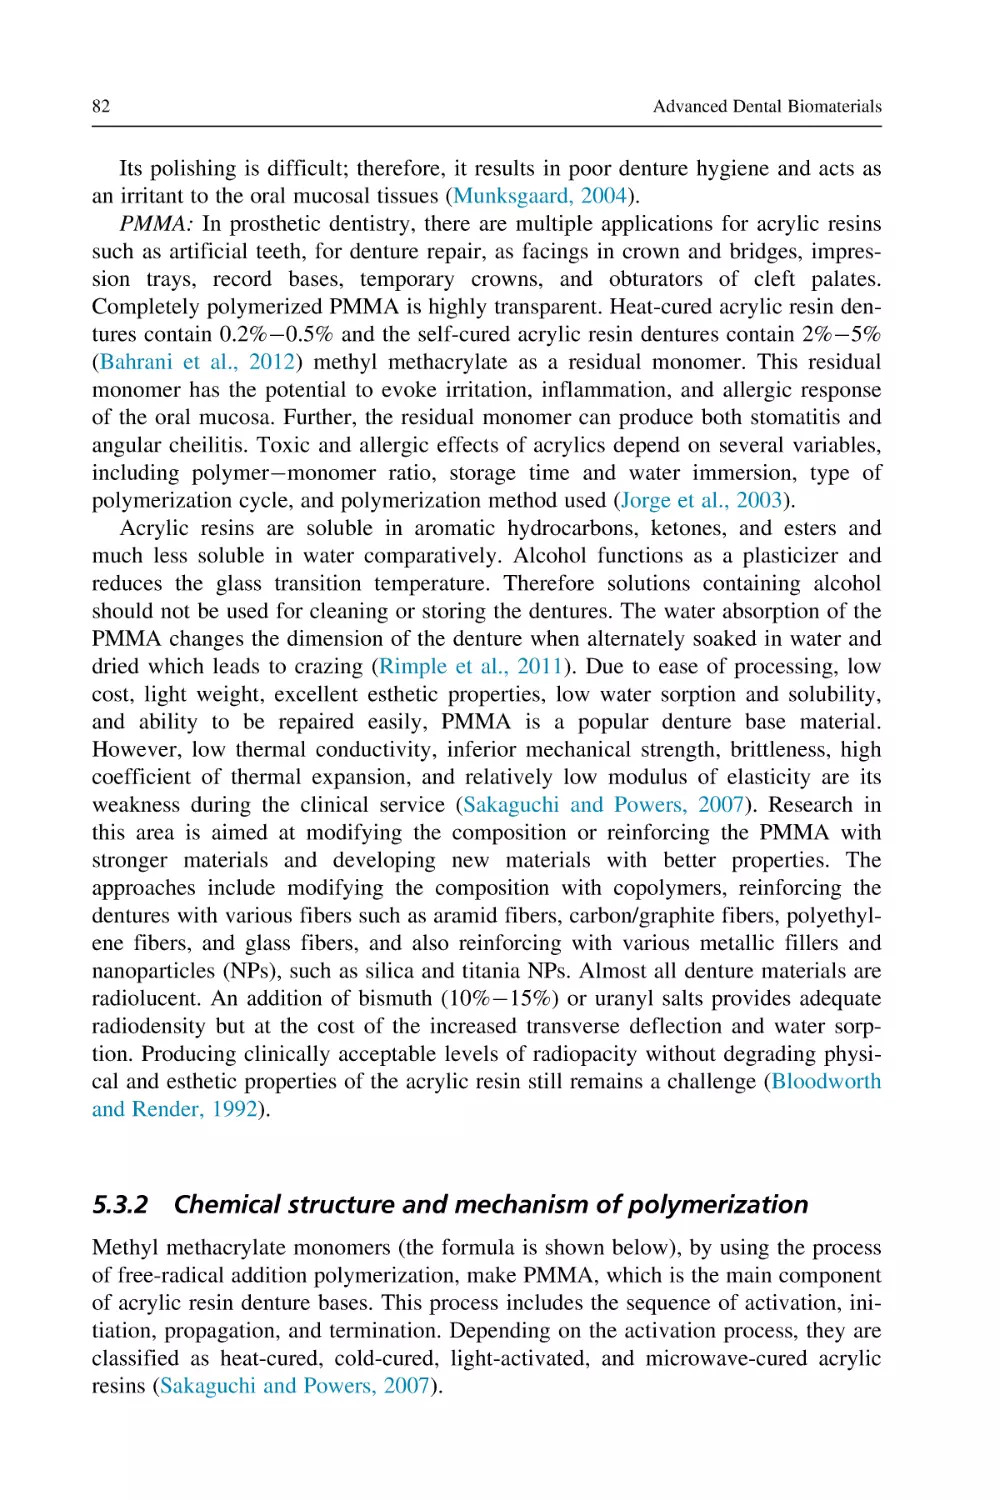 5.3.2 Chemical structure and mechanism of polymerization